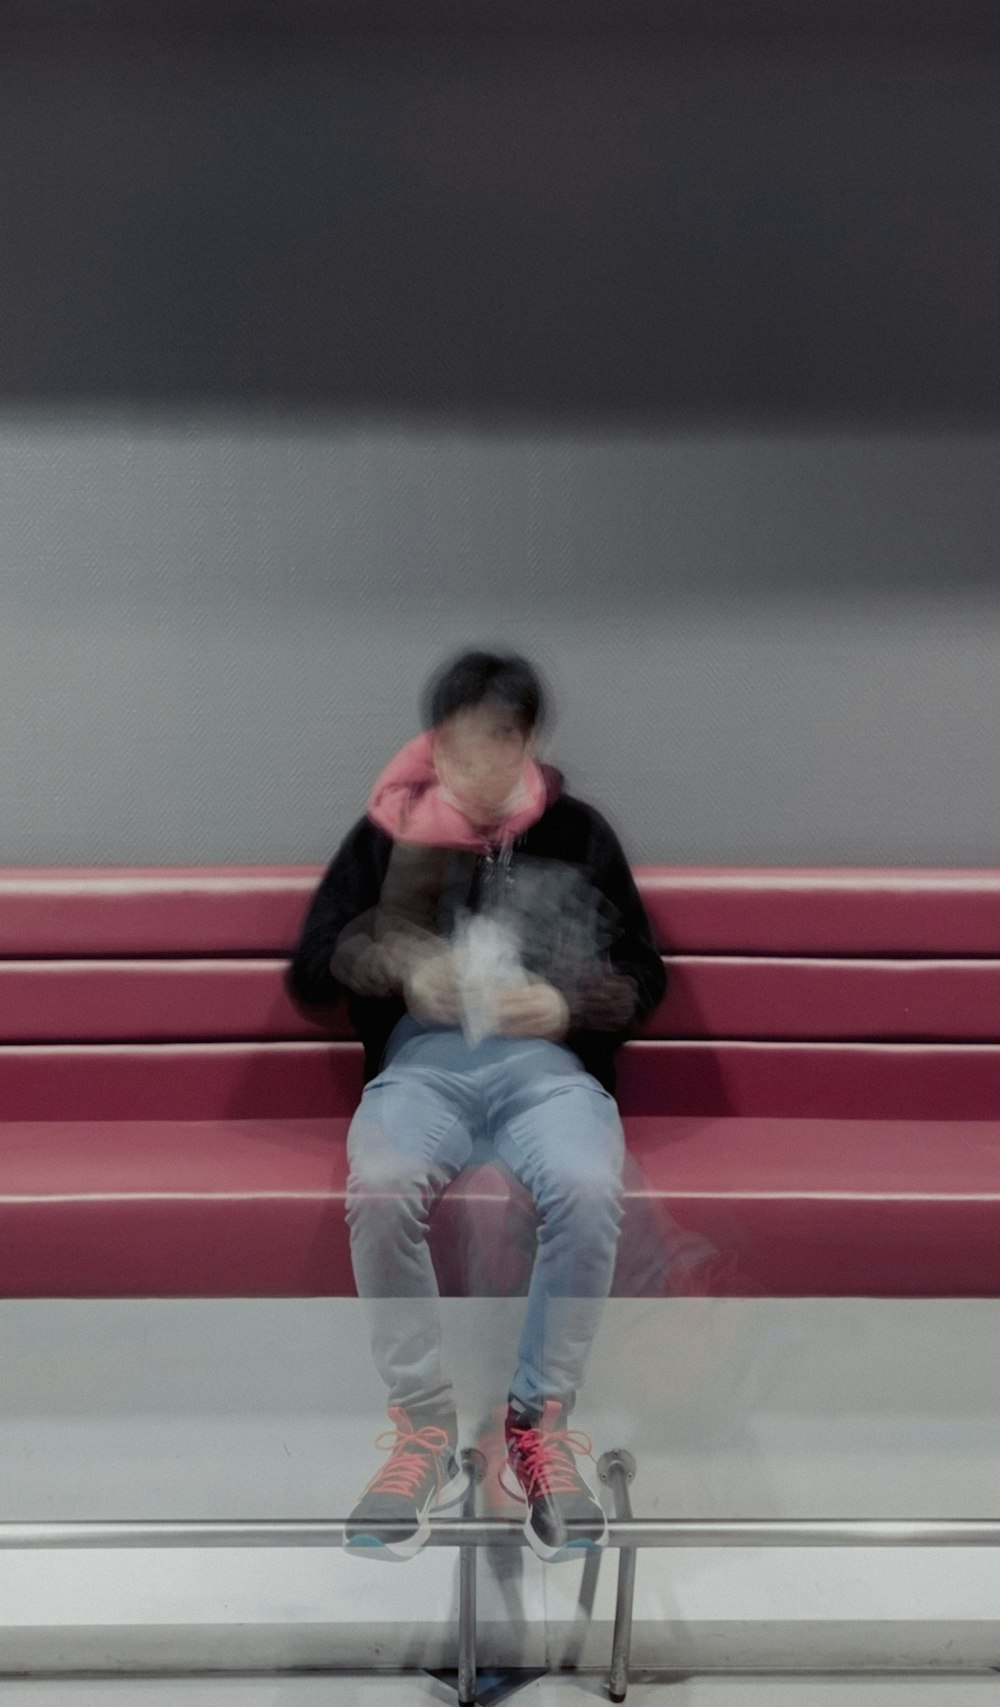 a person sitting on a bench with a cell phone